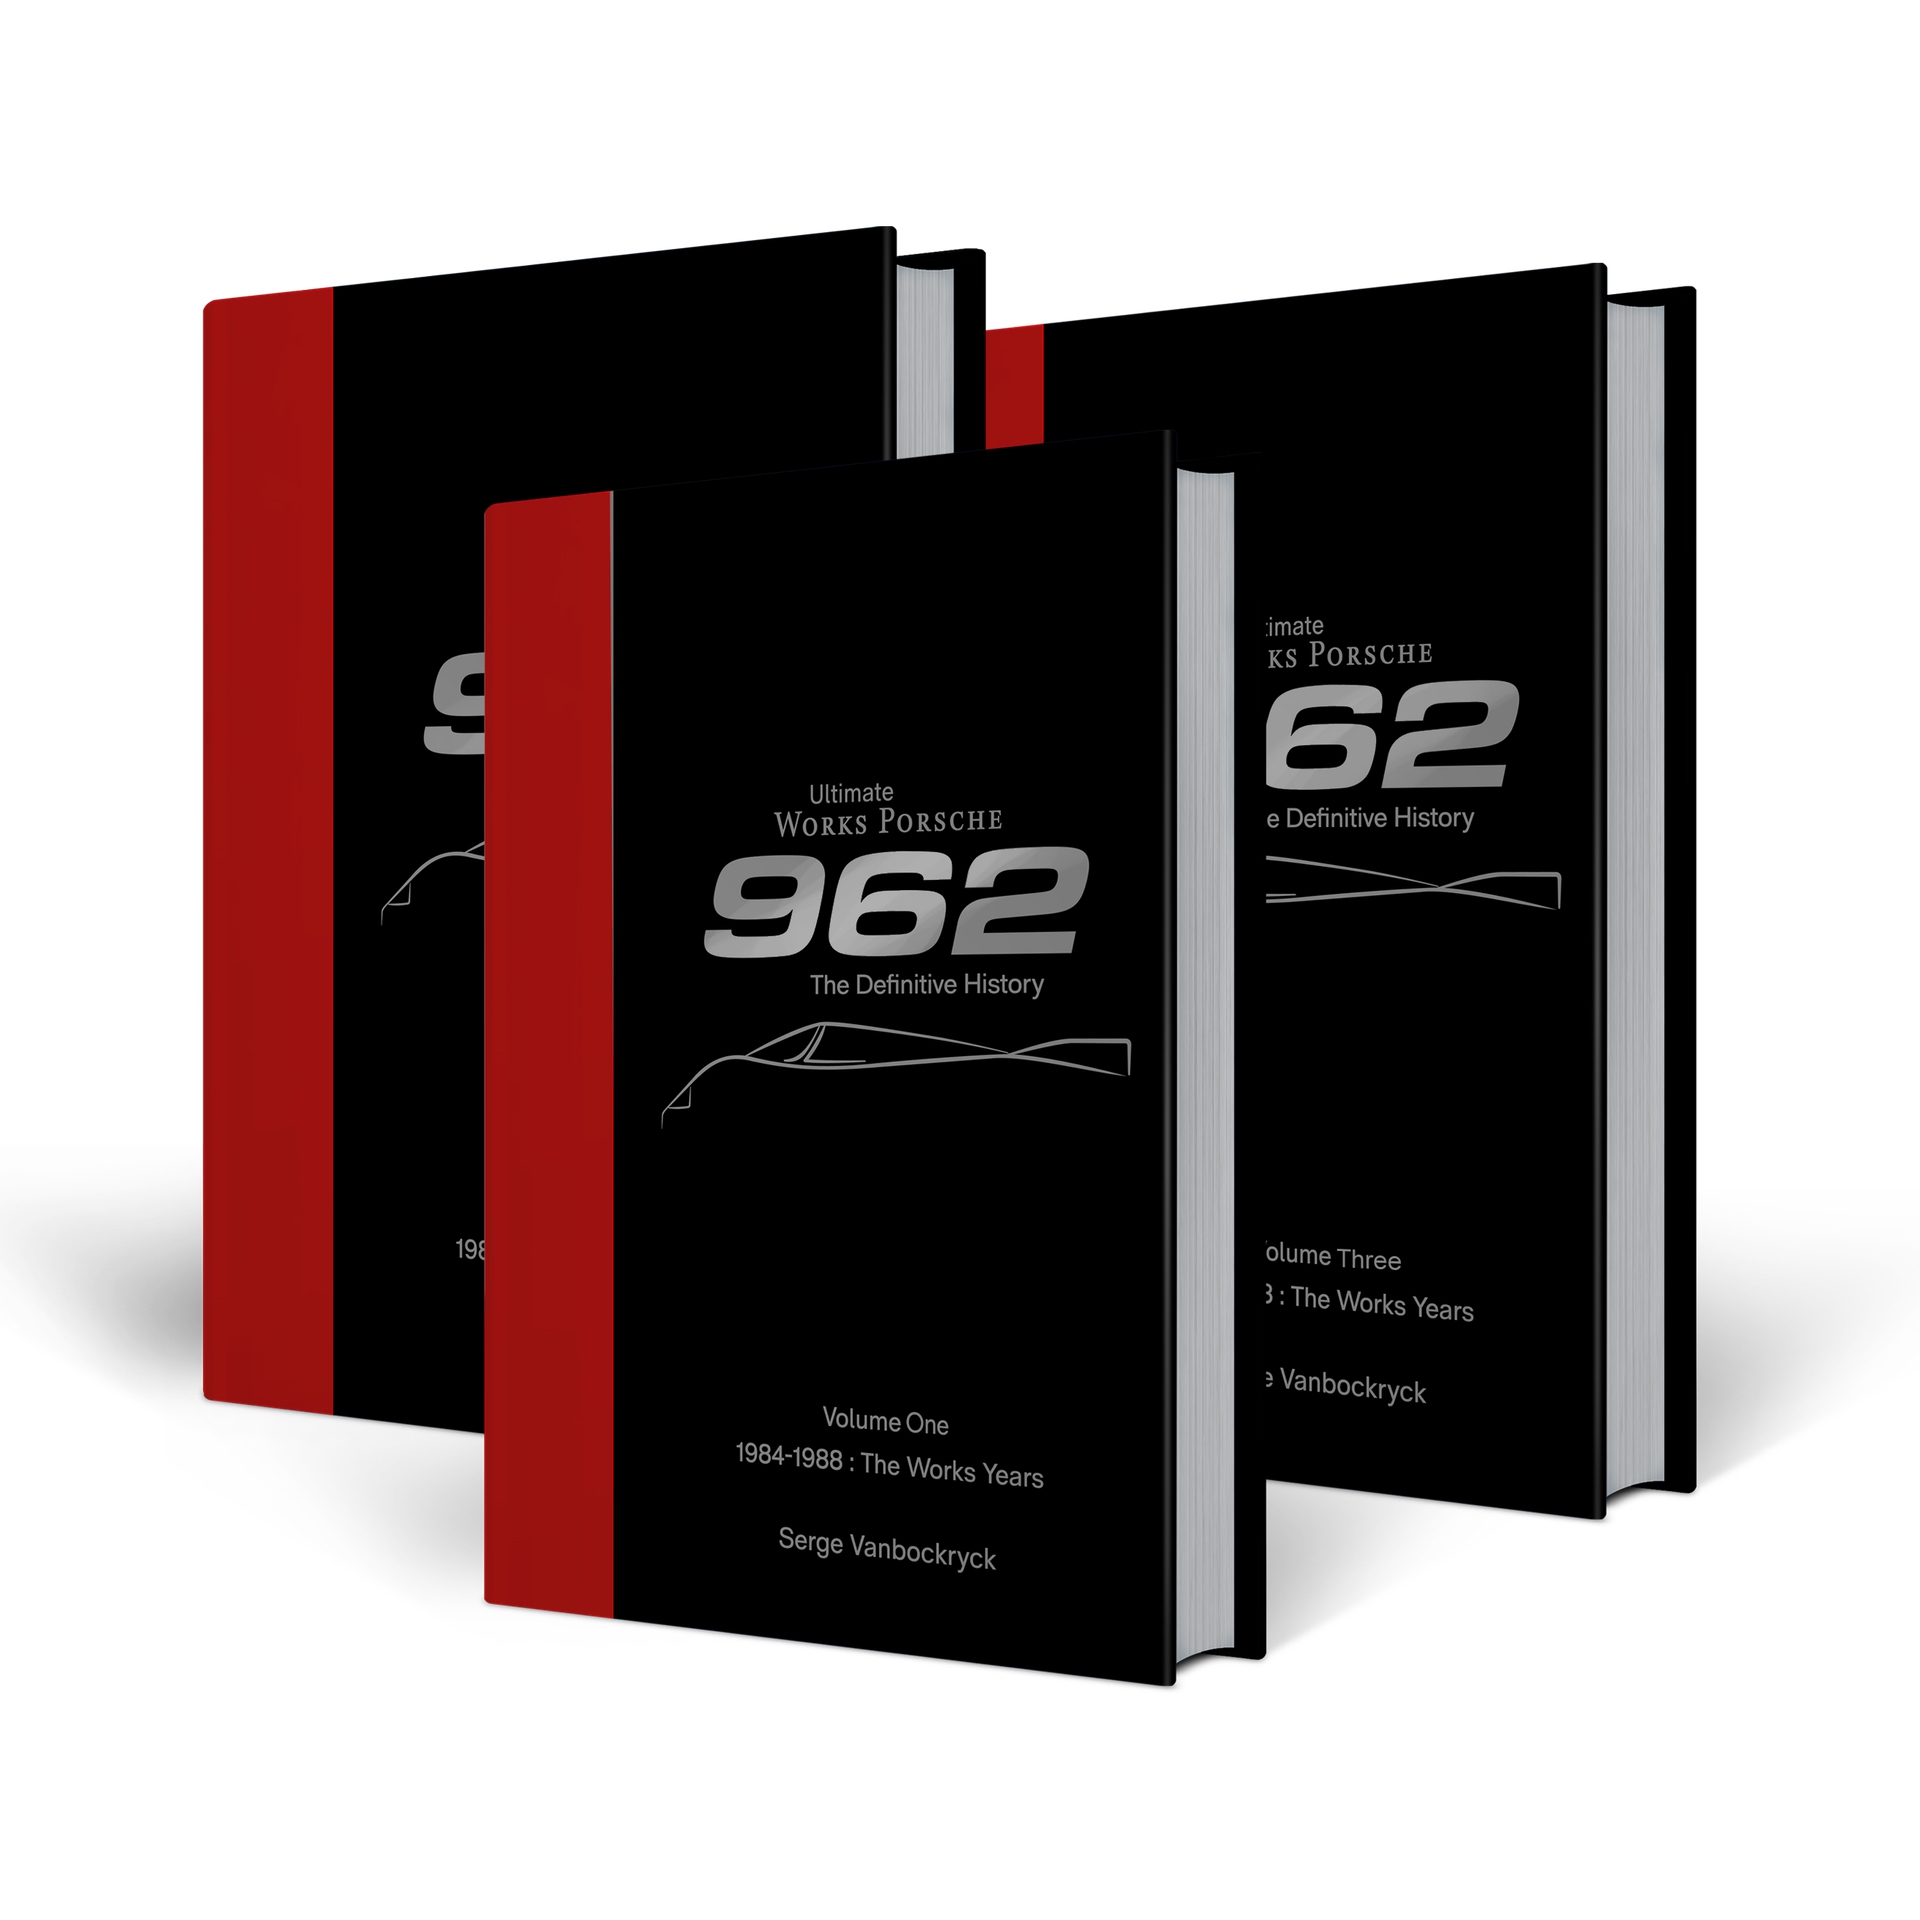 Available covers of Ultimate Works Porsche 962 - The Definitive History